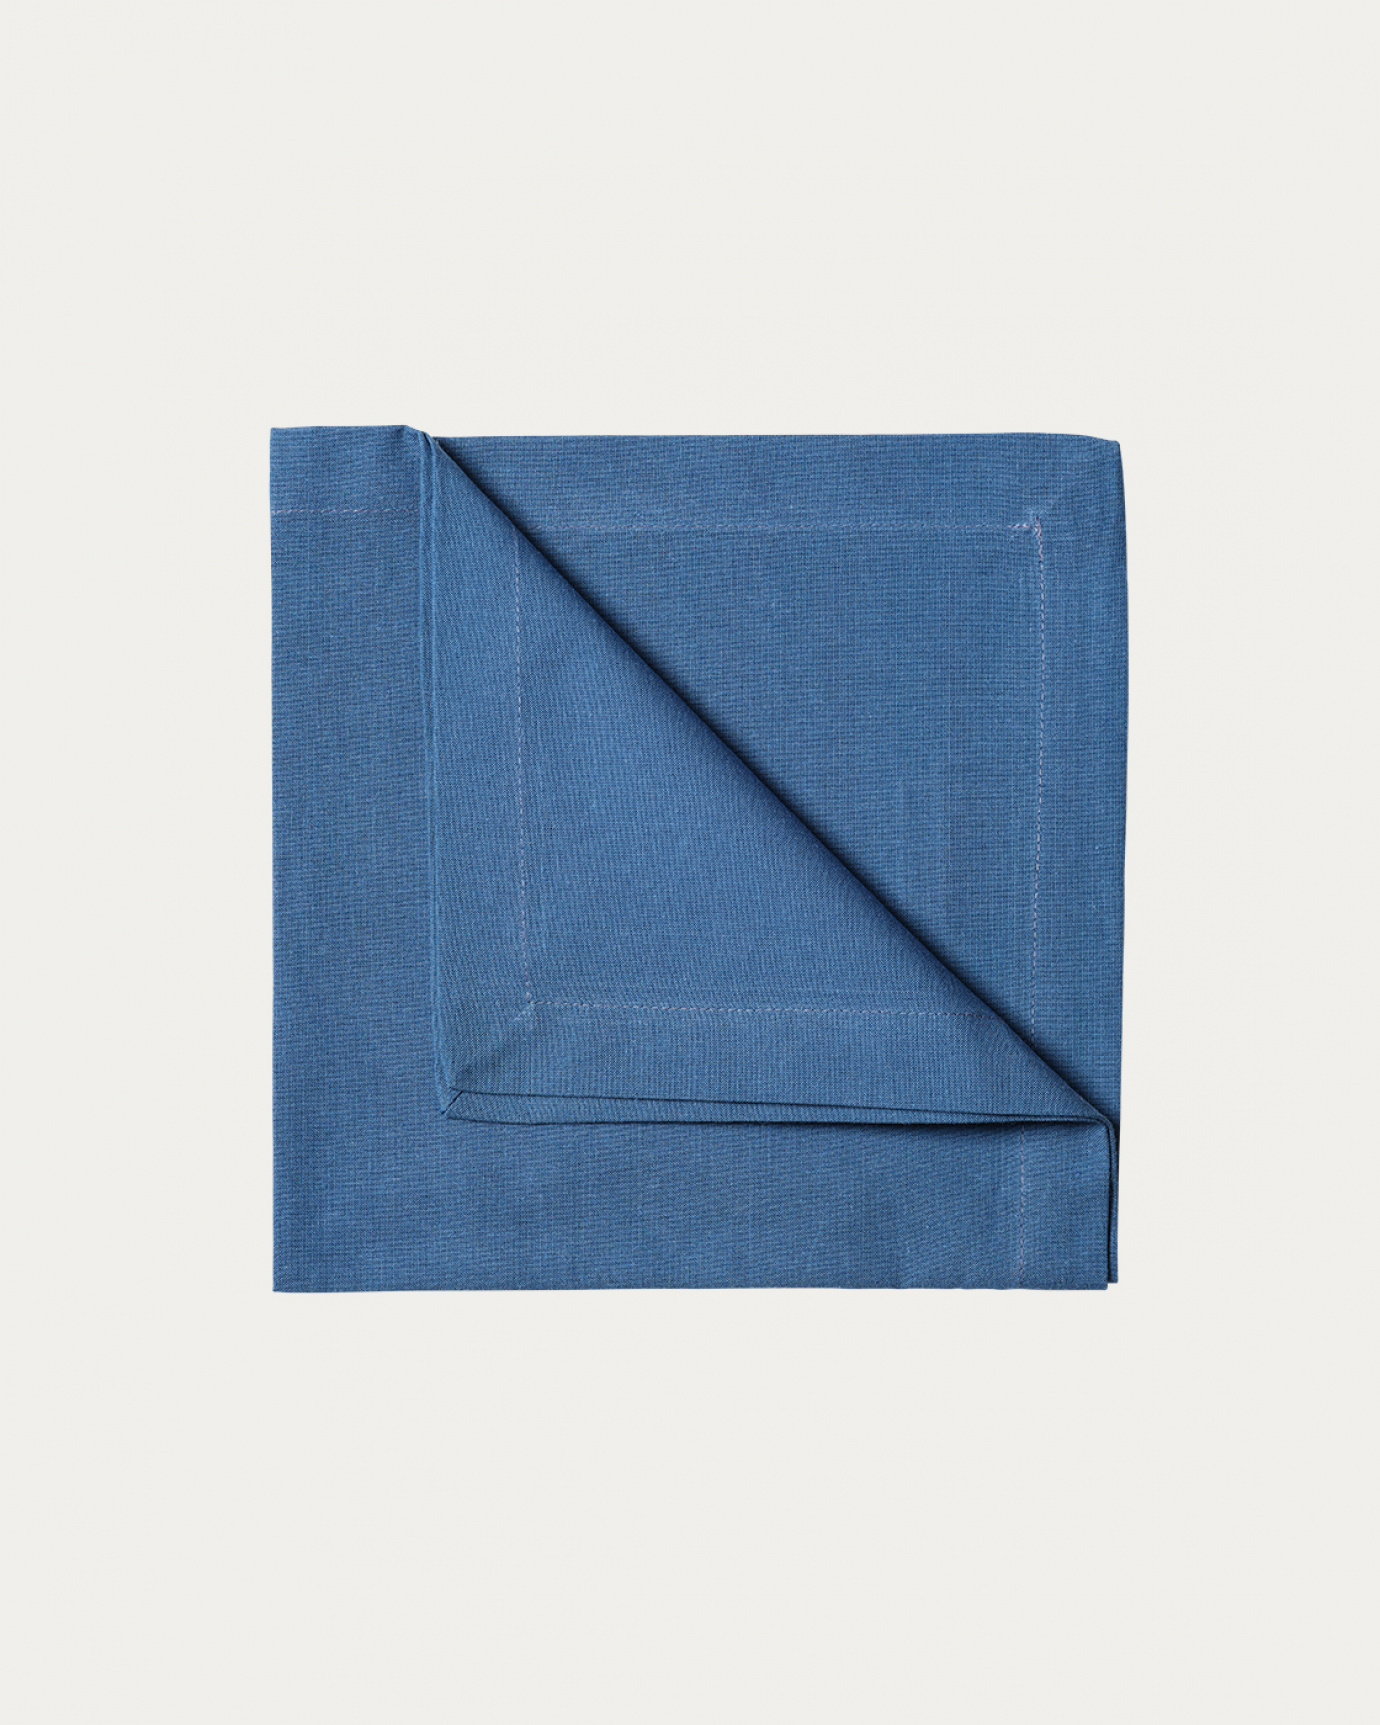 Product image deep sea blue ROBERT napkin made of soft cotton from LINUM DESIGN. Size 45x45 cm and sold in 4-pack.